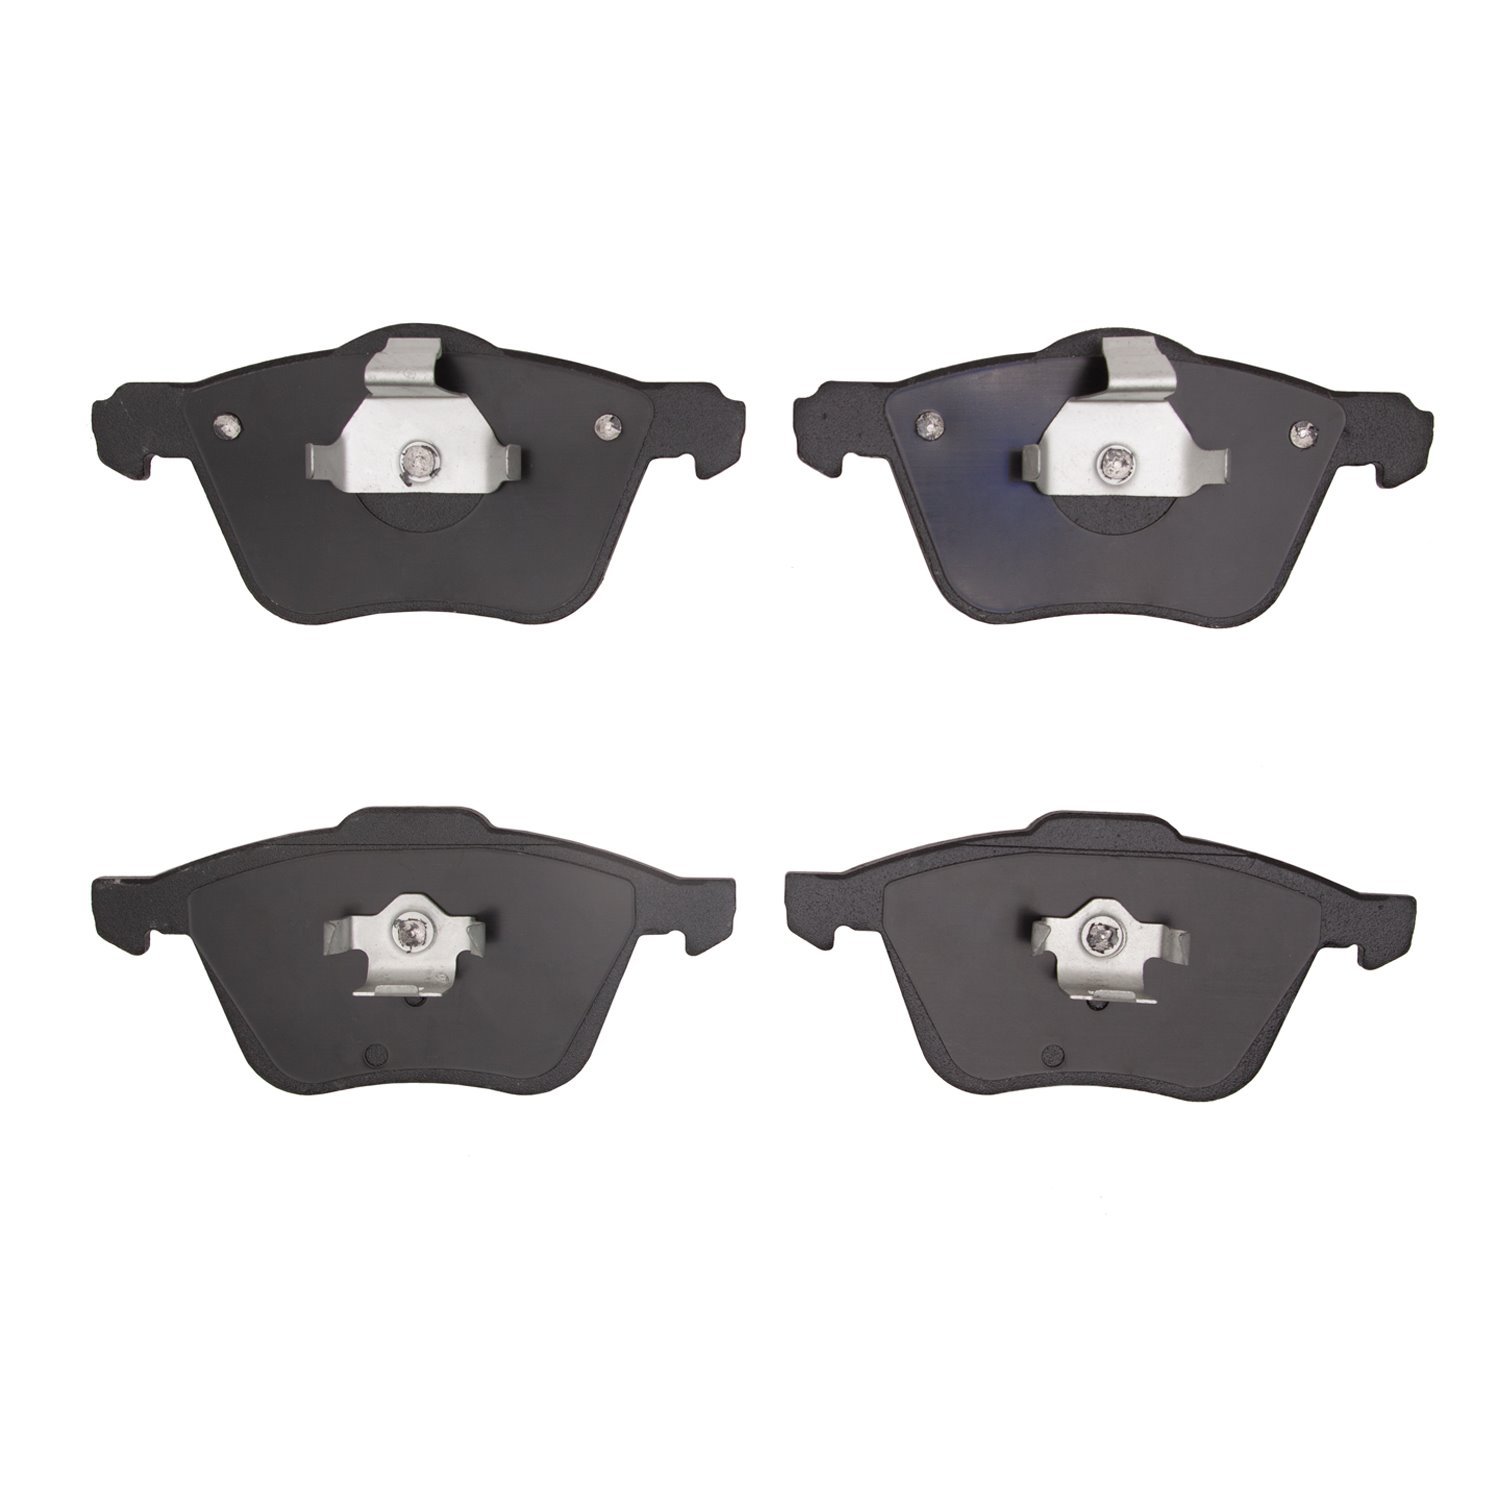 1551-0979-00 5000 Advanced Low-Metallic Brake Pads, 2003-2012 Multiple Makes/Models, Position: Front